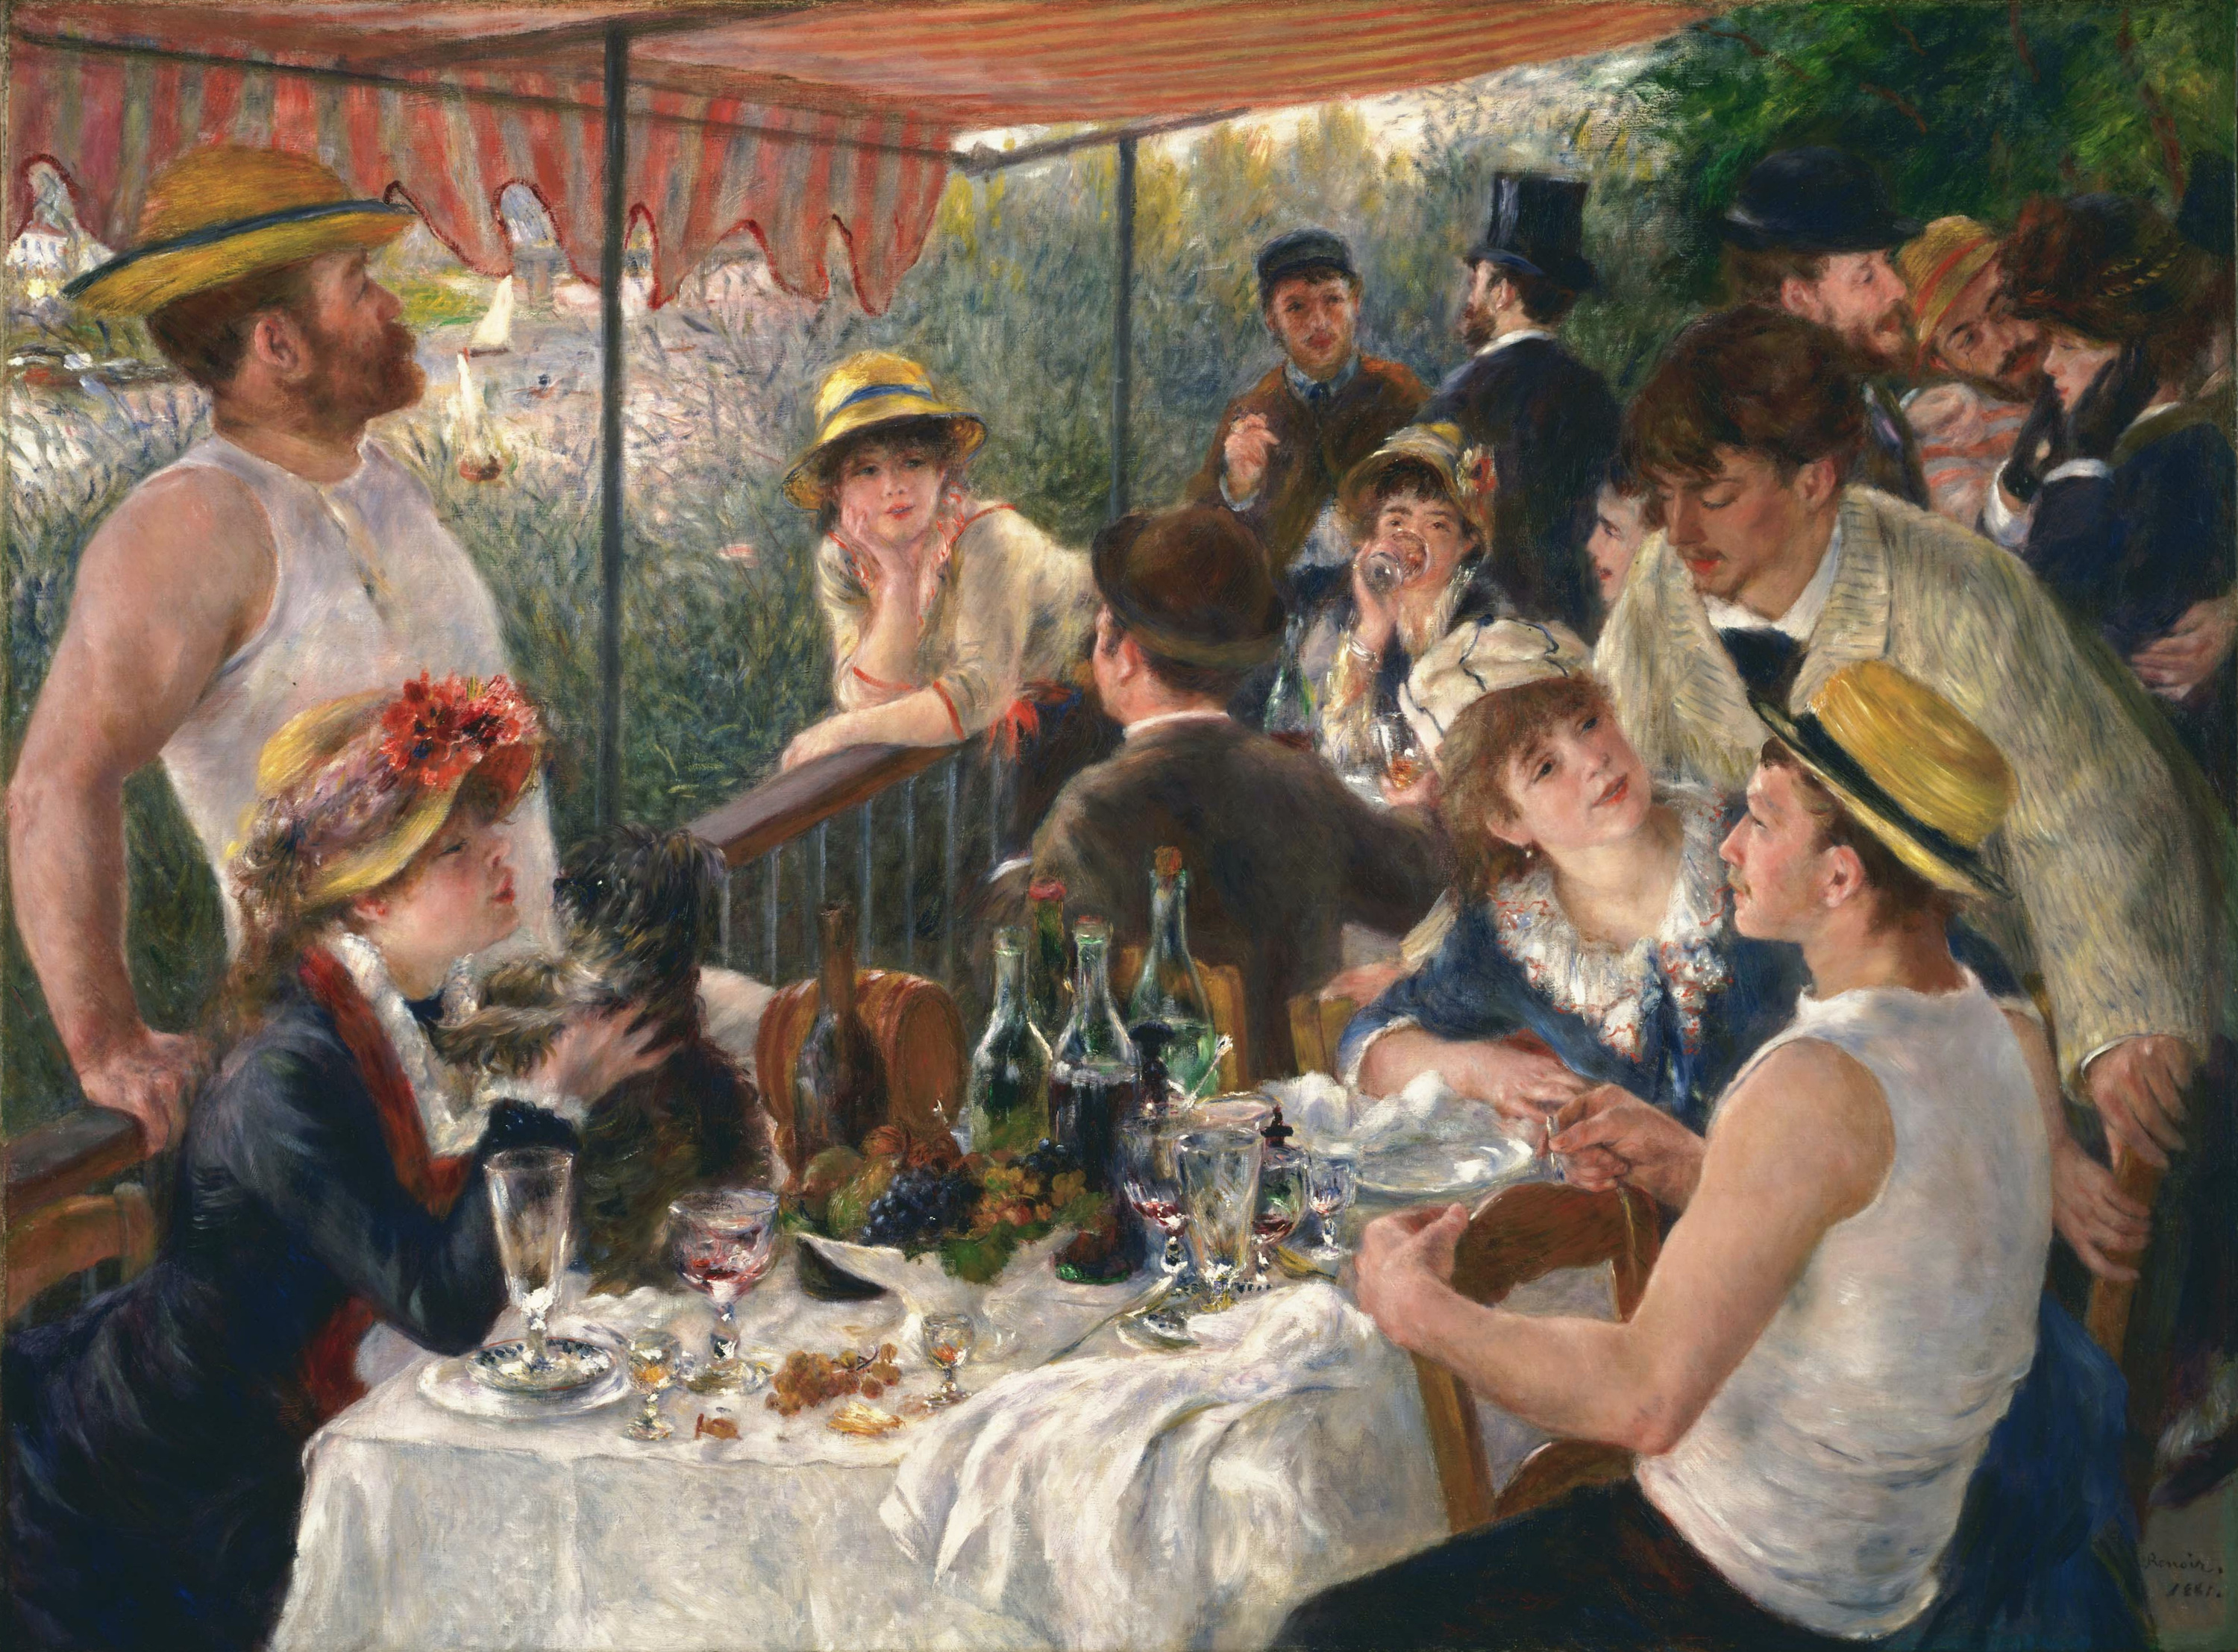 Luncheon of the Boating Party by Pierre-Auguste Renoir - 1880-1881 - 69.13 x 51.25 in The Phillips Collection